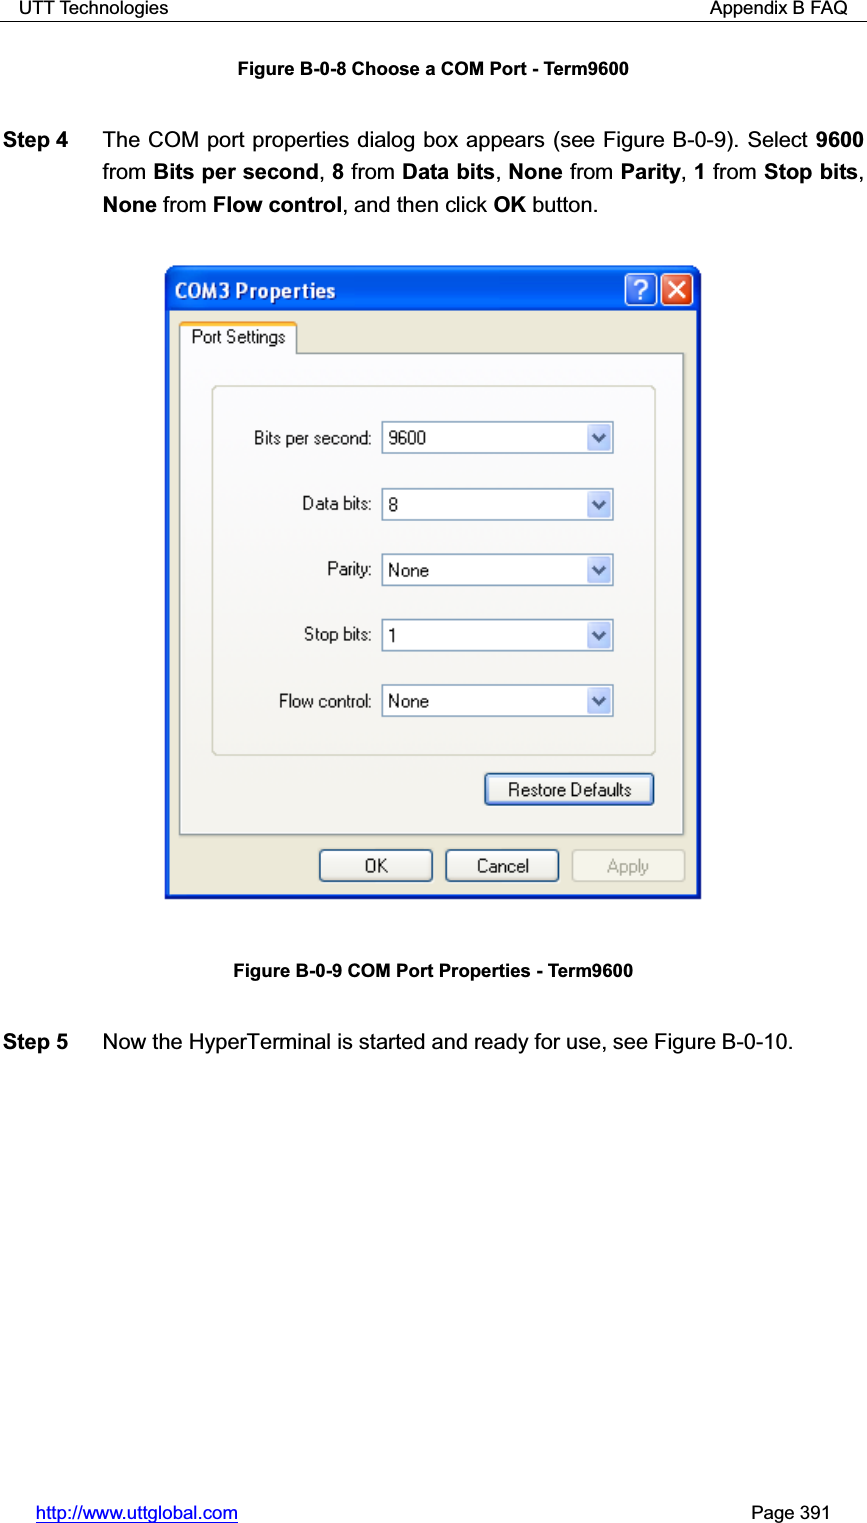 UTT Technologies                                                          Appendix B FAQ http://www.uttglobal.com                                                       Page 391 Figure B-0-8 Choose a COM Port - Term9600 Step 4  The COM port properties dialog box appears (see Figure B-0-9). Select 9600from Bits per second,8 from Data bits,None from Parity,1 from Stop bits,None from Flow control, and then click OK button. Figure B-0-9 COM Port Properties - Term9600 Step 5  Now the HyperTerminal is started and ready for use, see Figure B-0-10.   